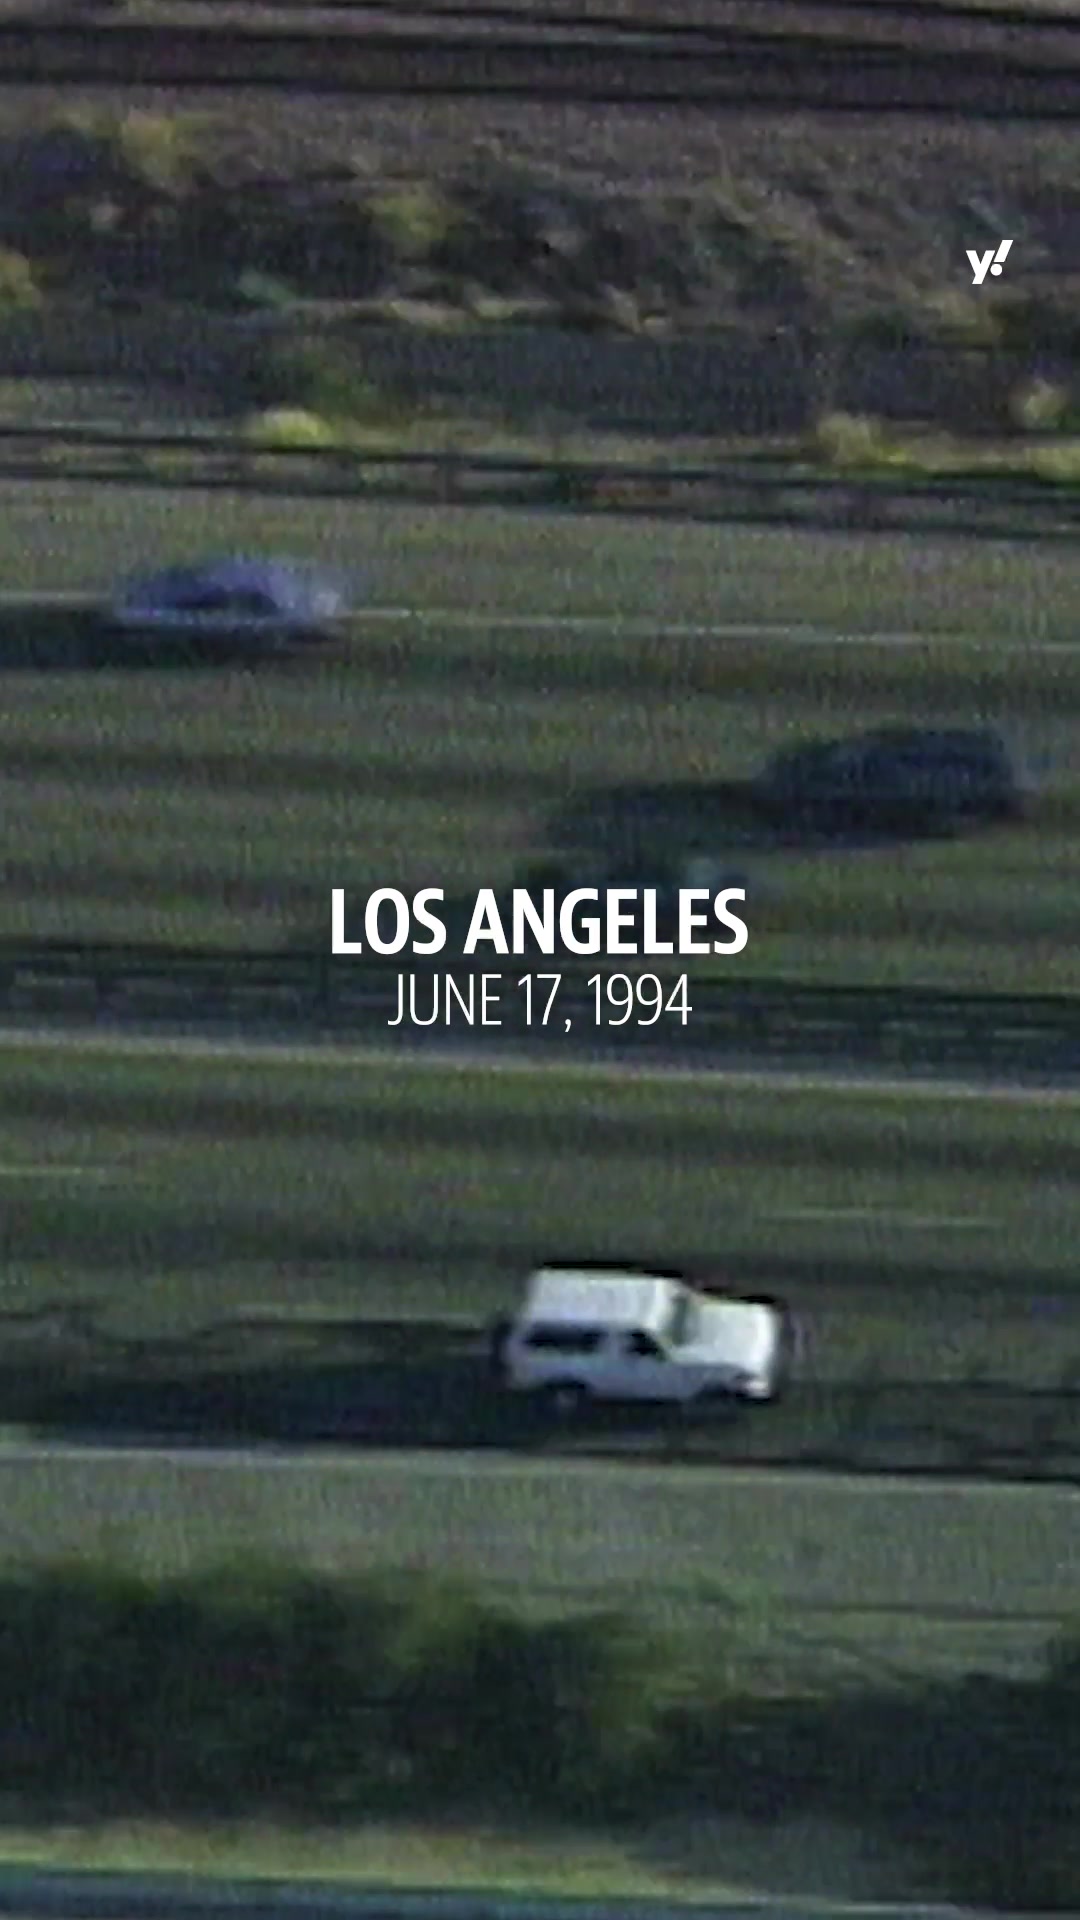 Part 1: It's been 30 years since O.J. Simpson's Bronco chase captivated the nation, in 1994. But what was it like to actually witness it? #news #ojsimpson #yahoonews